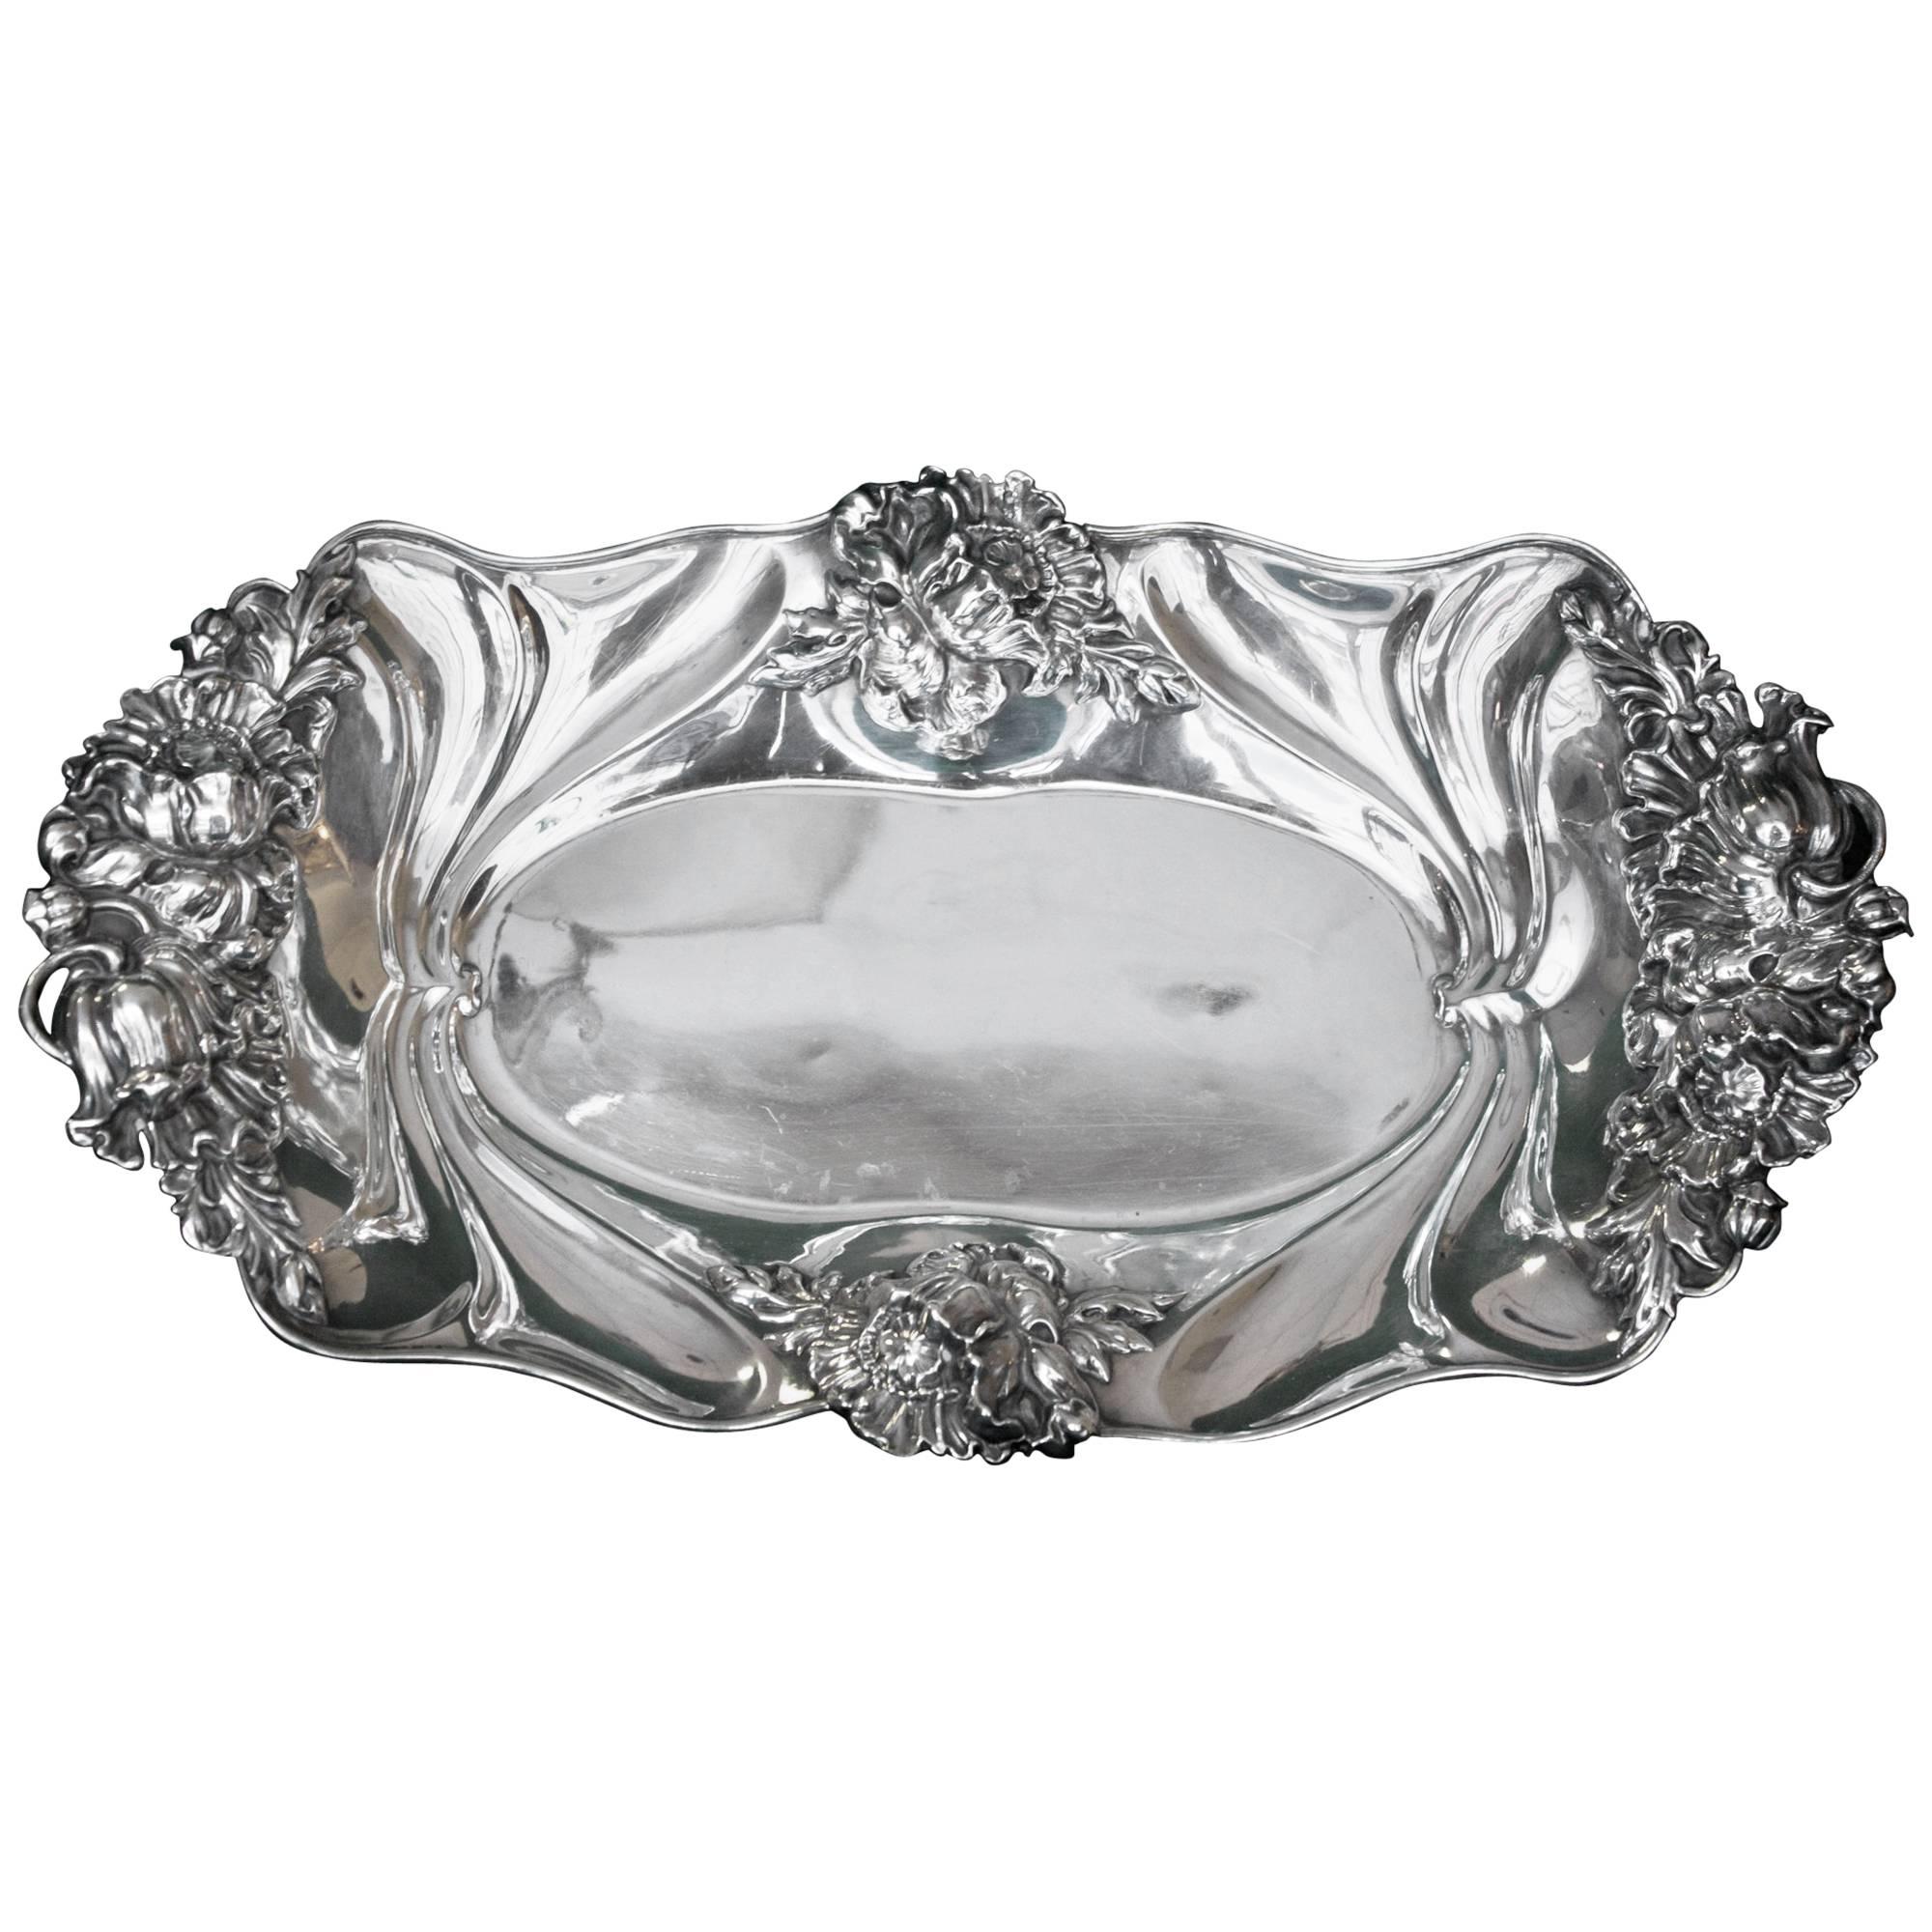 Art Nouveau Sterling Silver Bread Tray Opium Poppies